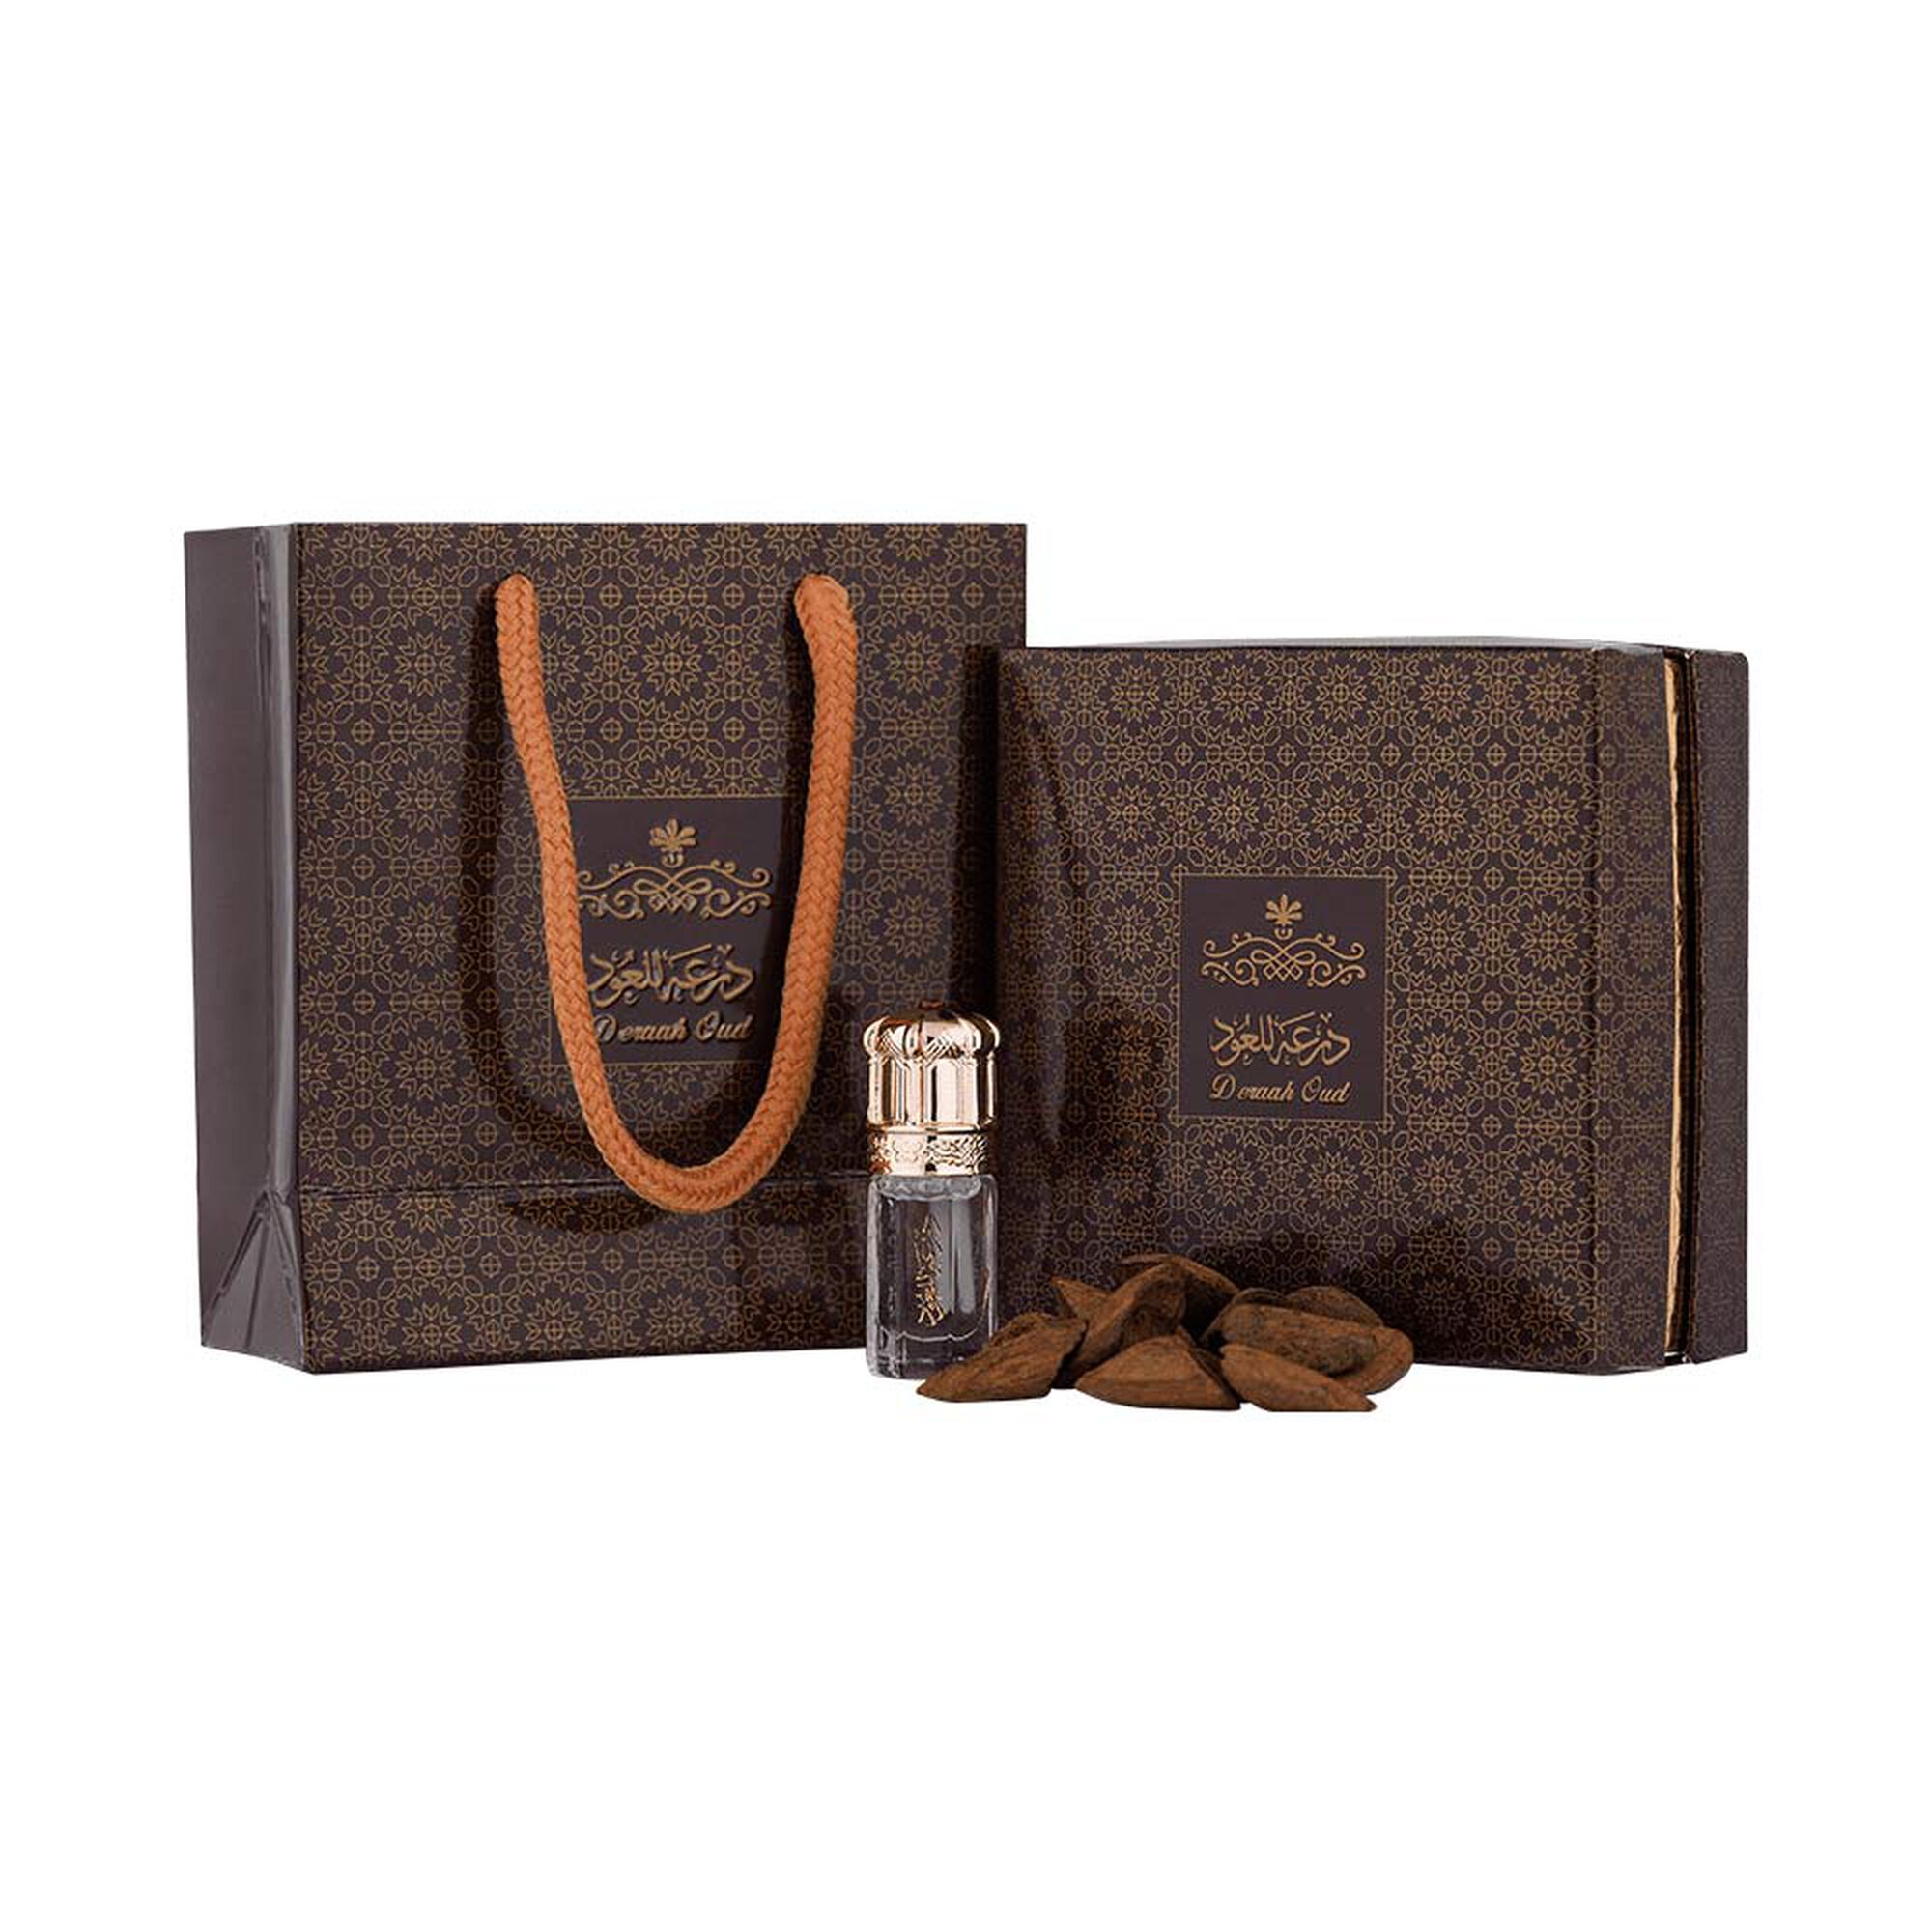 Two-piece gift set